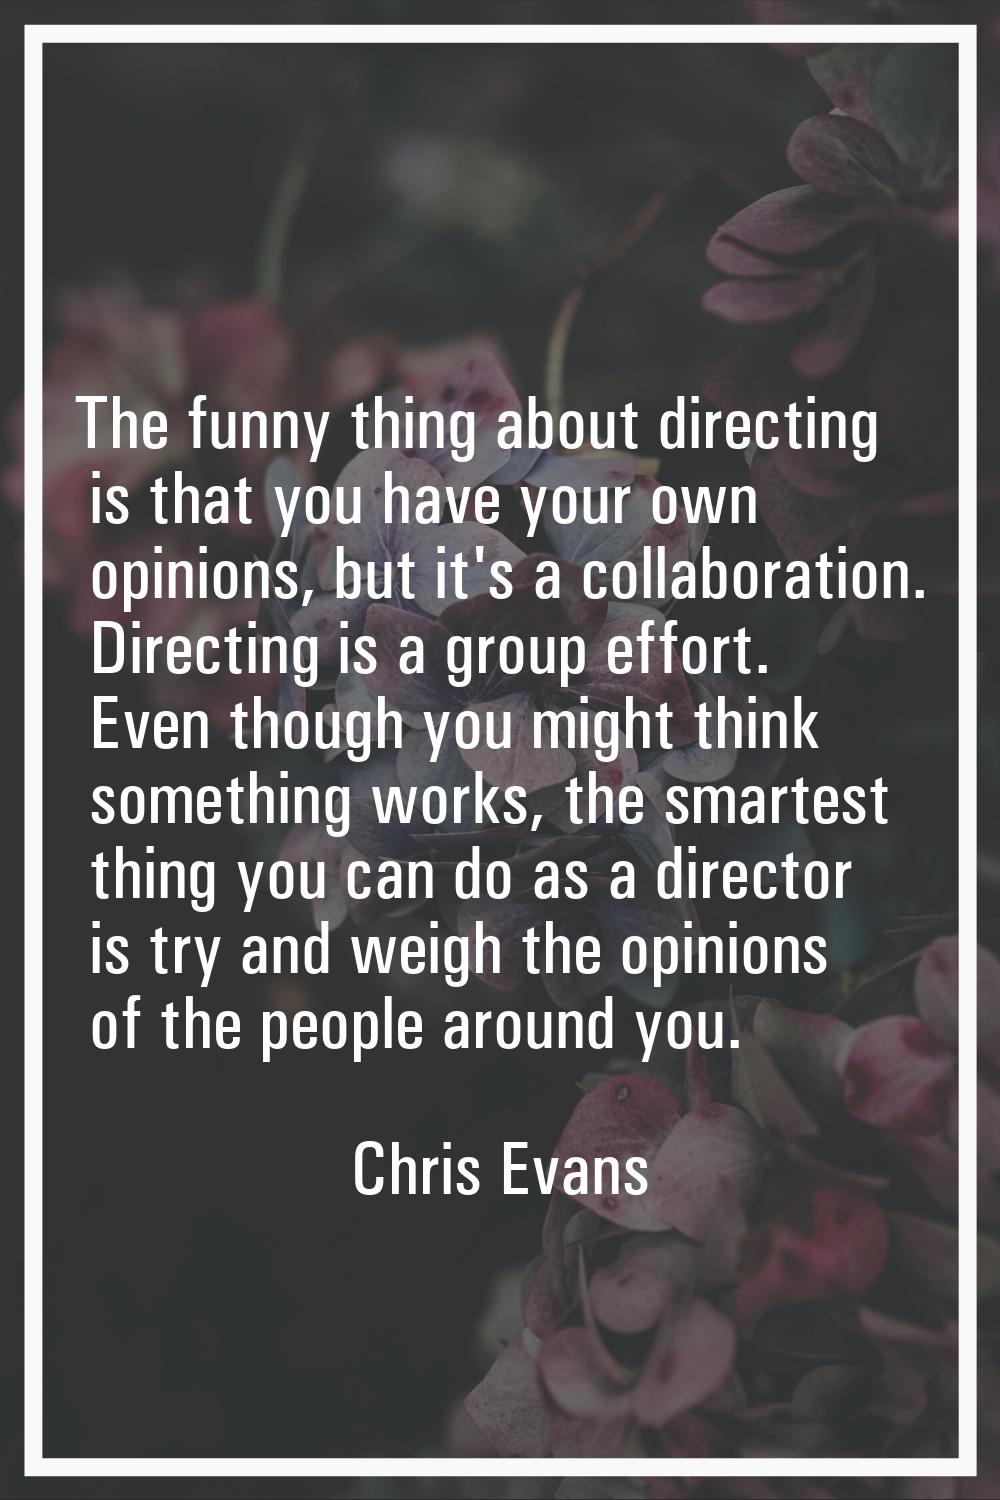 The funny thing about directing is that you have your own opinions, but it's a collaboration. Direc